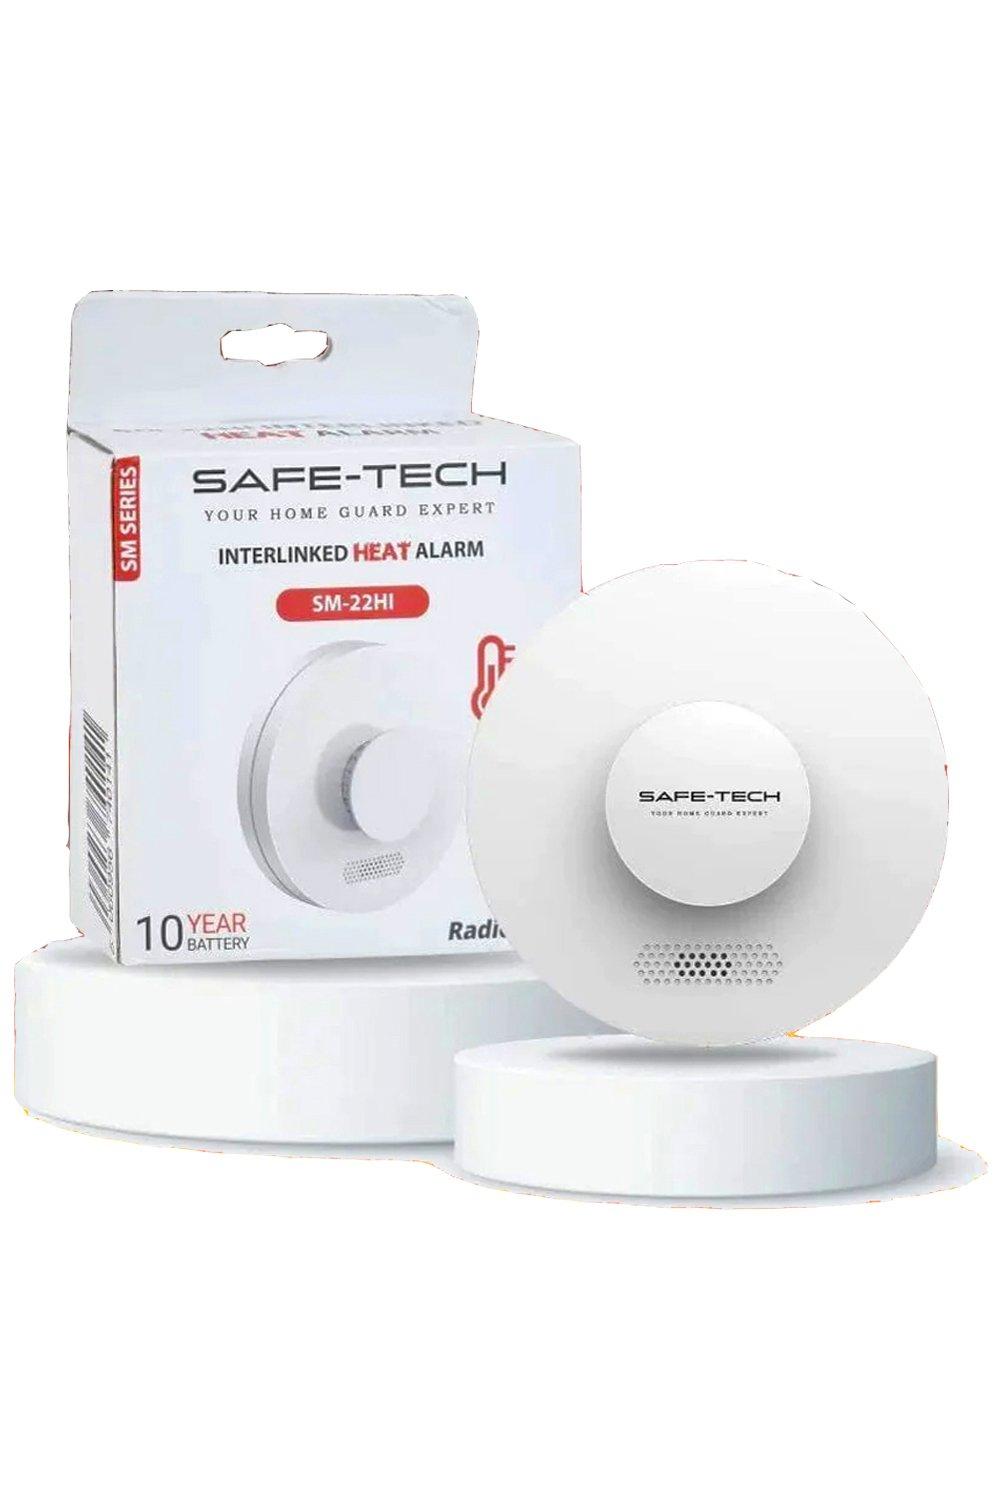 SM Series Home Interlinked Smoke Alarm, Slim Design, with Tamper-Proof 10 Year Battery